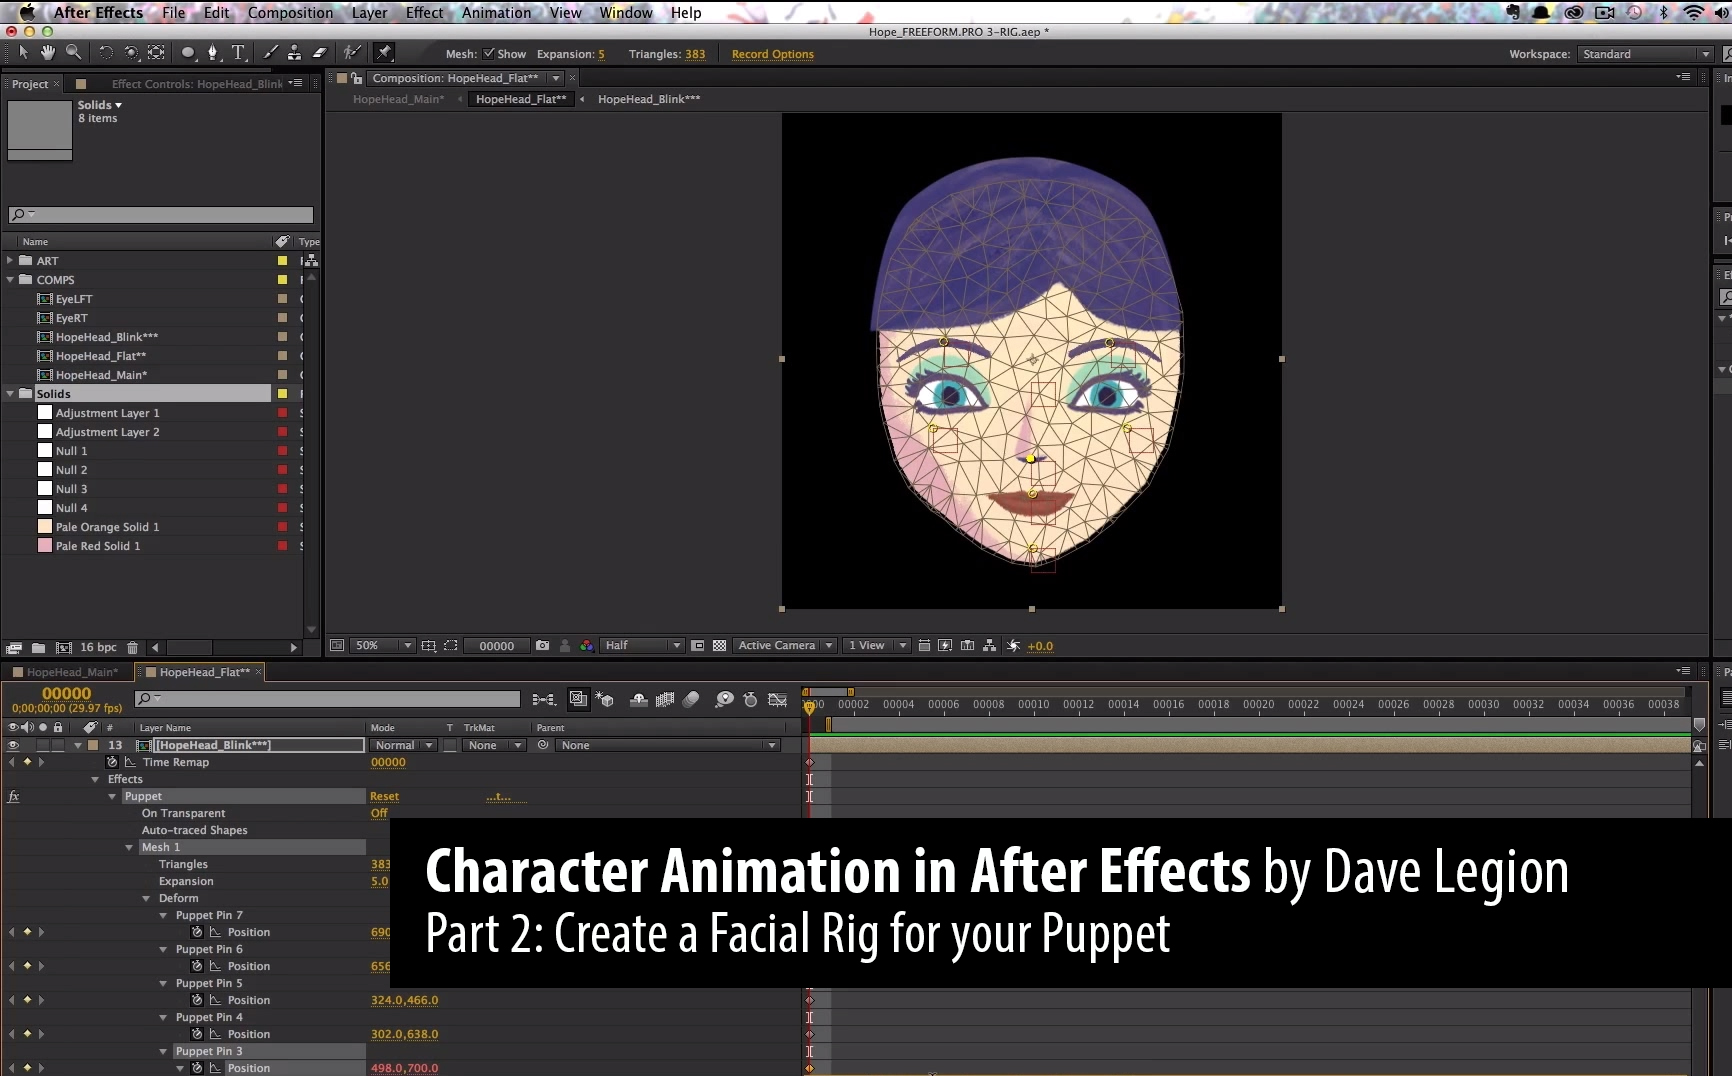 Part 2: Character Animation in After Effects by Dave Legion